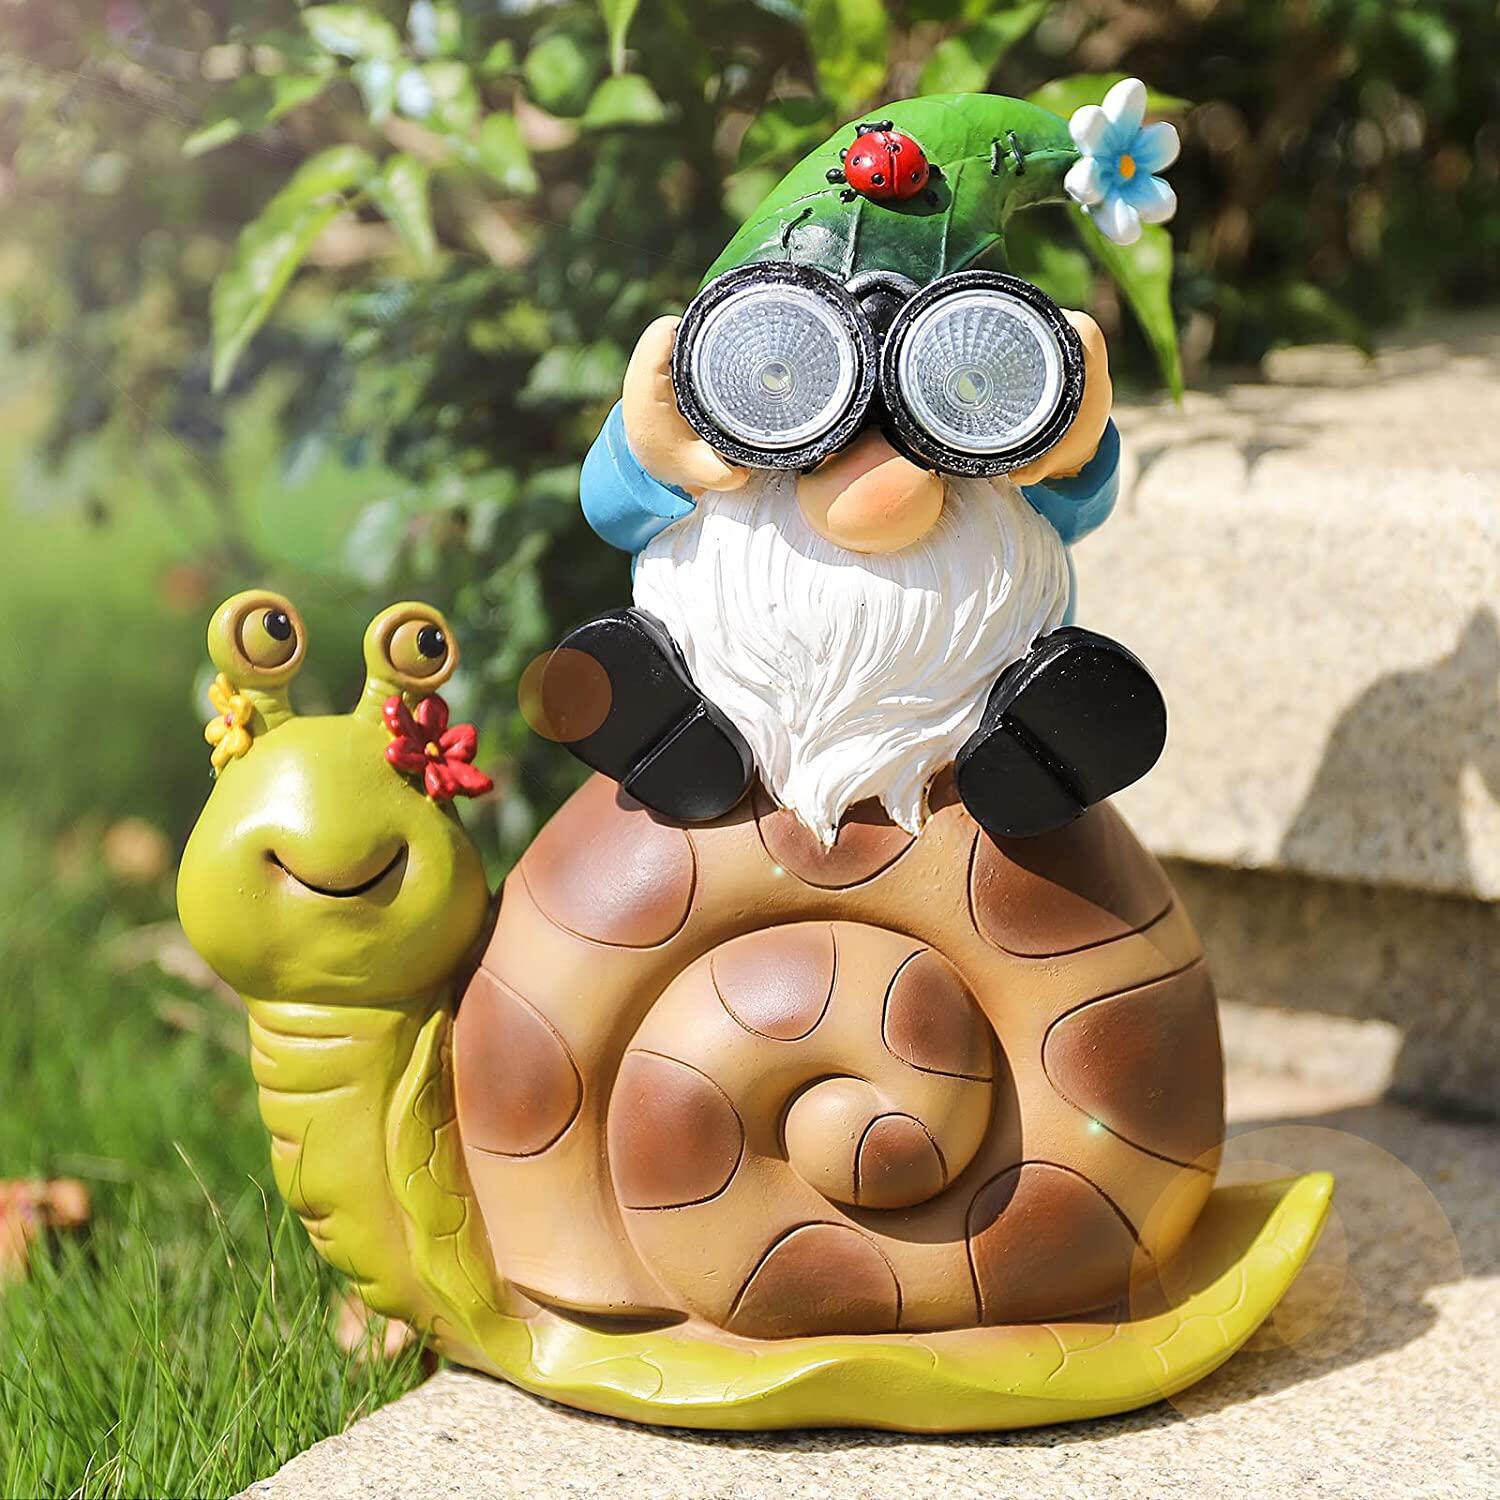 Snail Statue Décor With Solar Lights, Garden Gnome, Snail Gnome, Gnomes For Sale, Lawn Gnomes, Funny Garden Gnomes, Yard Gnome, Gnome Statue, Unique Garden Gnomes, Outdoor Gnomes, Solar Lights Gnome, Resin Garden Gnome, Gnome Decor, Garden Gnomes For Sale, Funny Garden Gnomes.